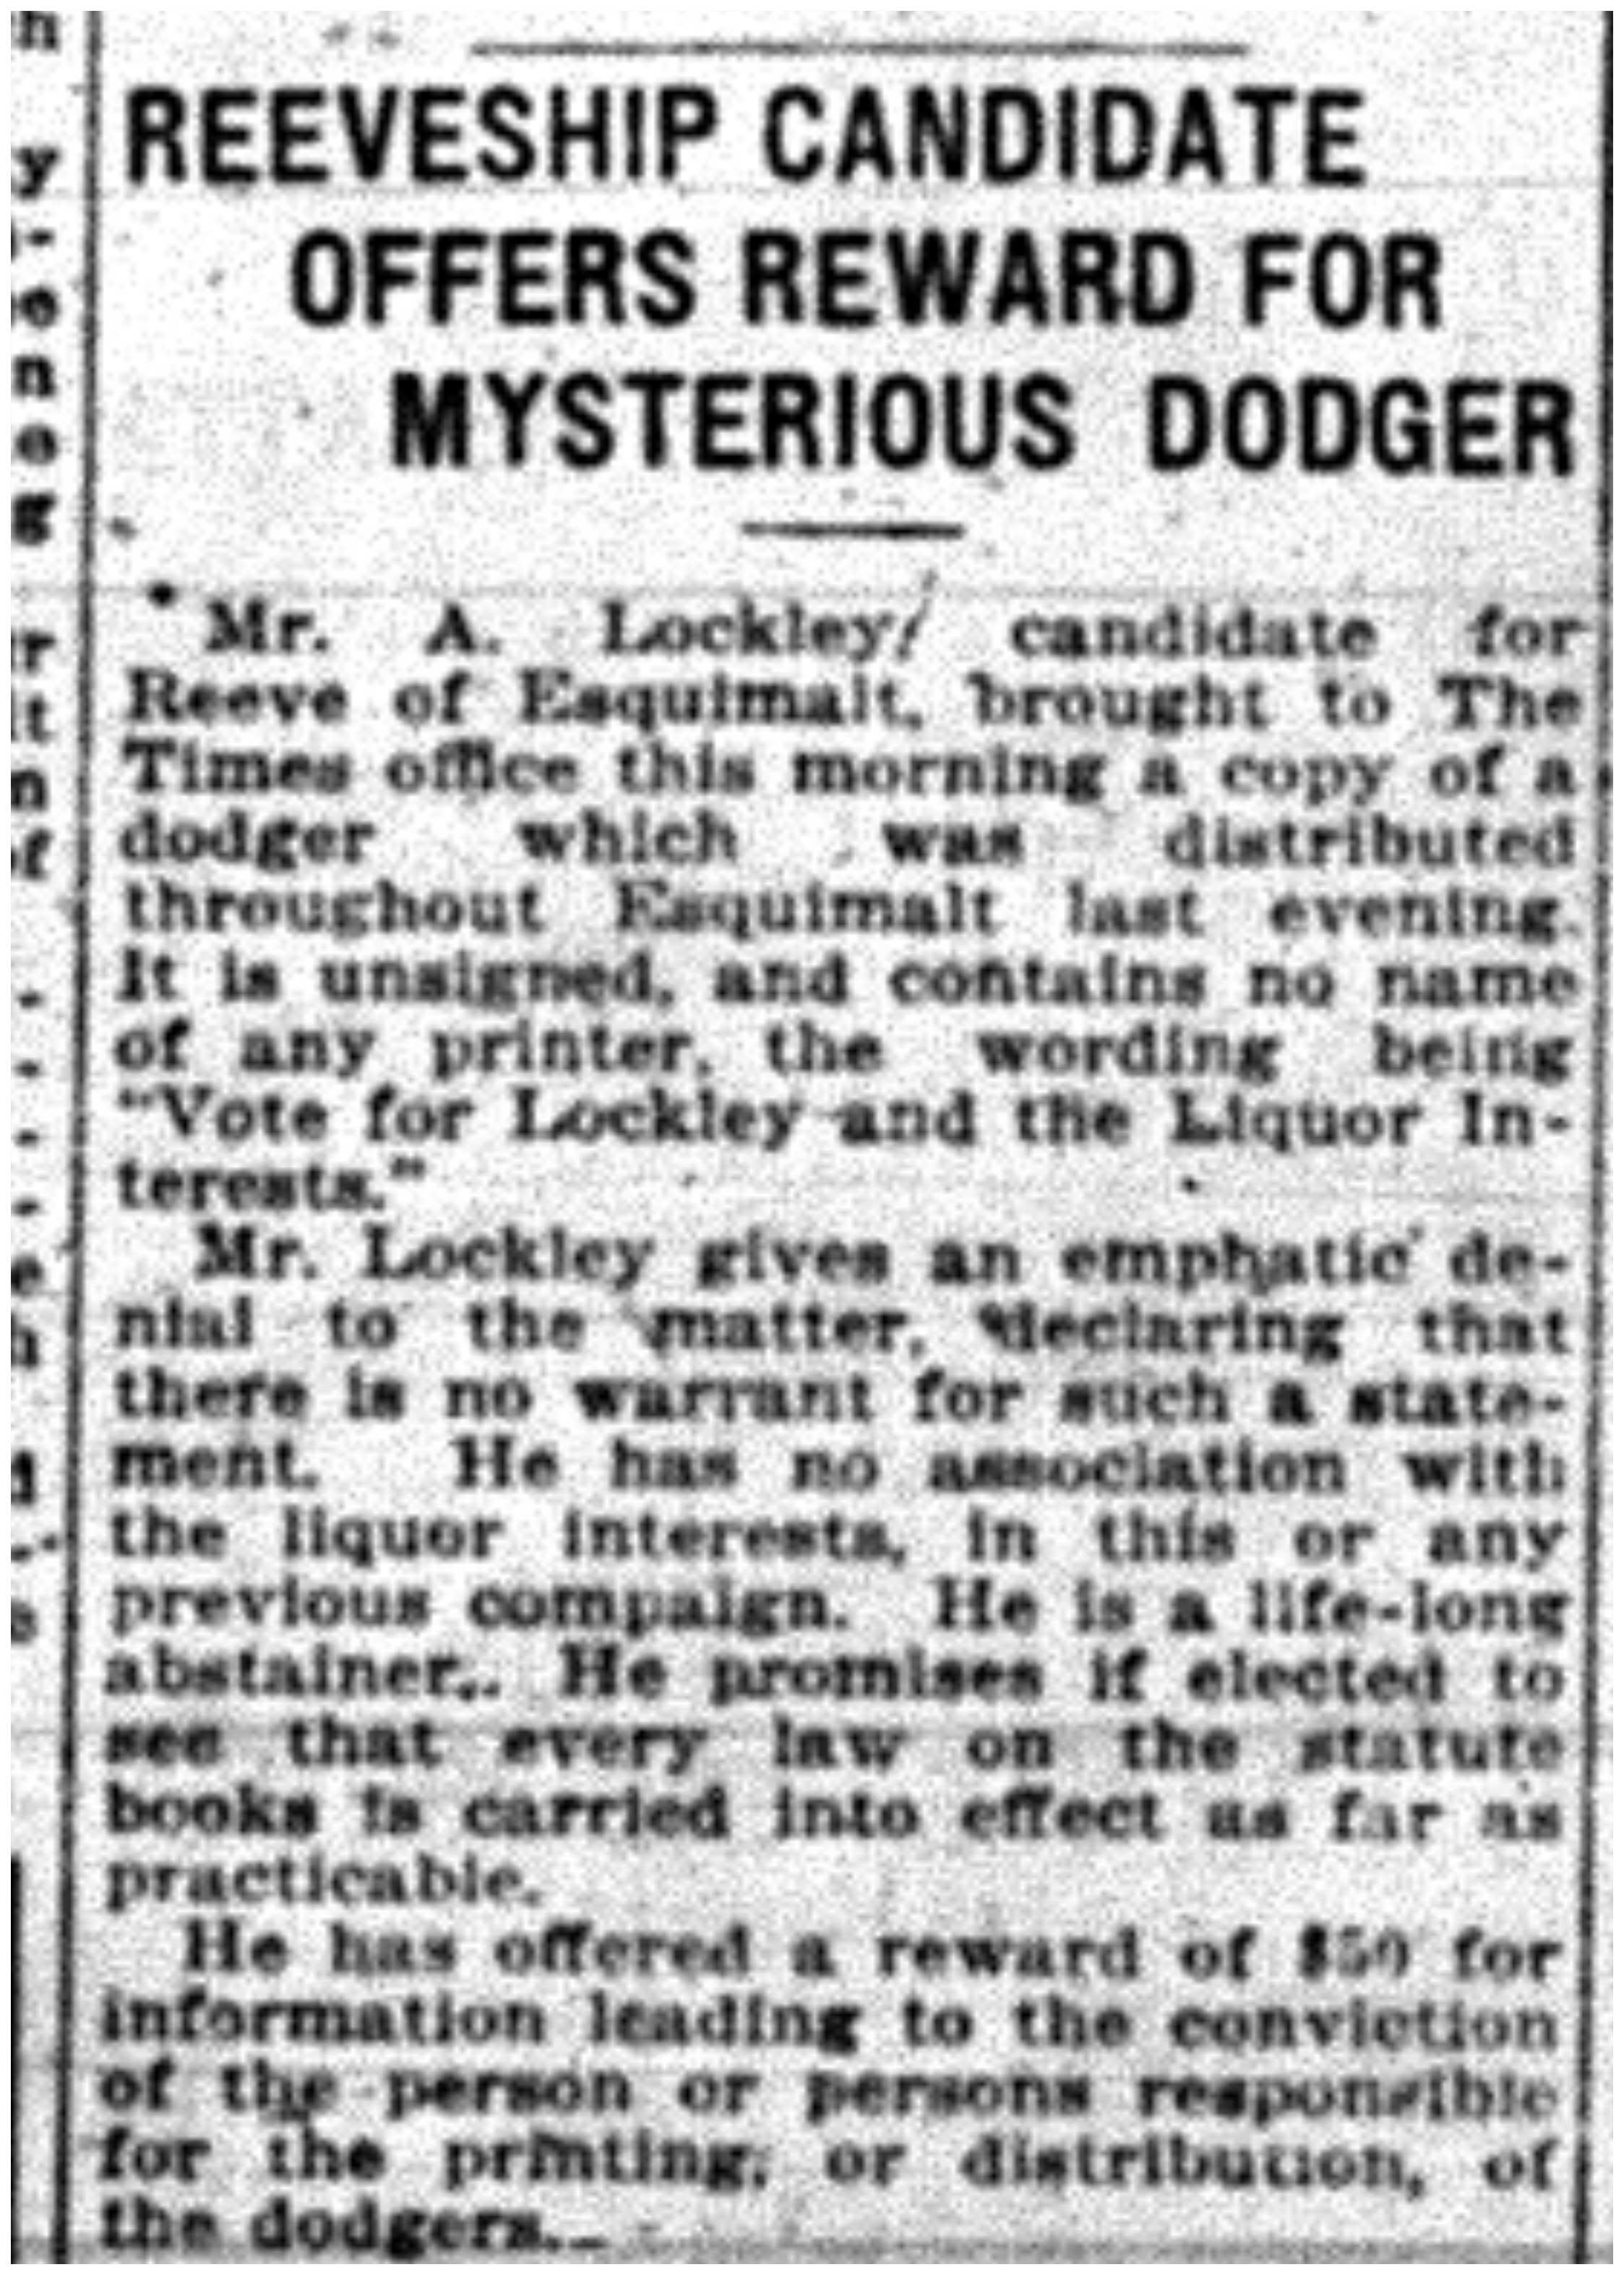 "Reeveship Candidate Offers Reward for Mysterious Dodger"